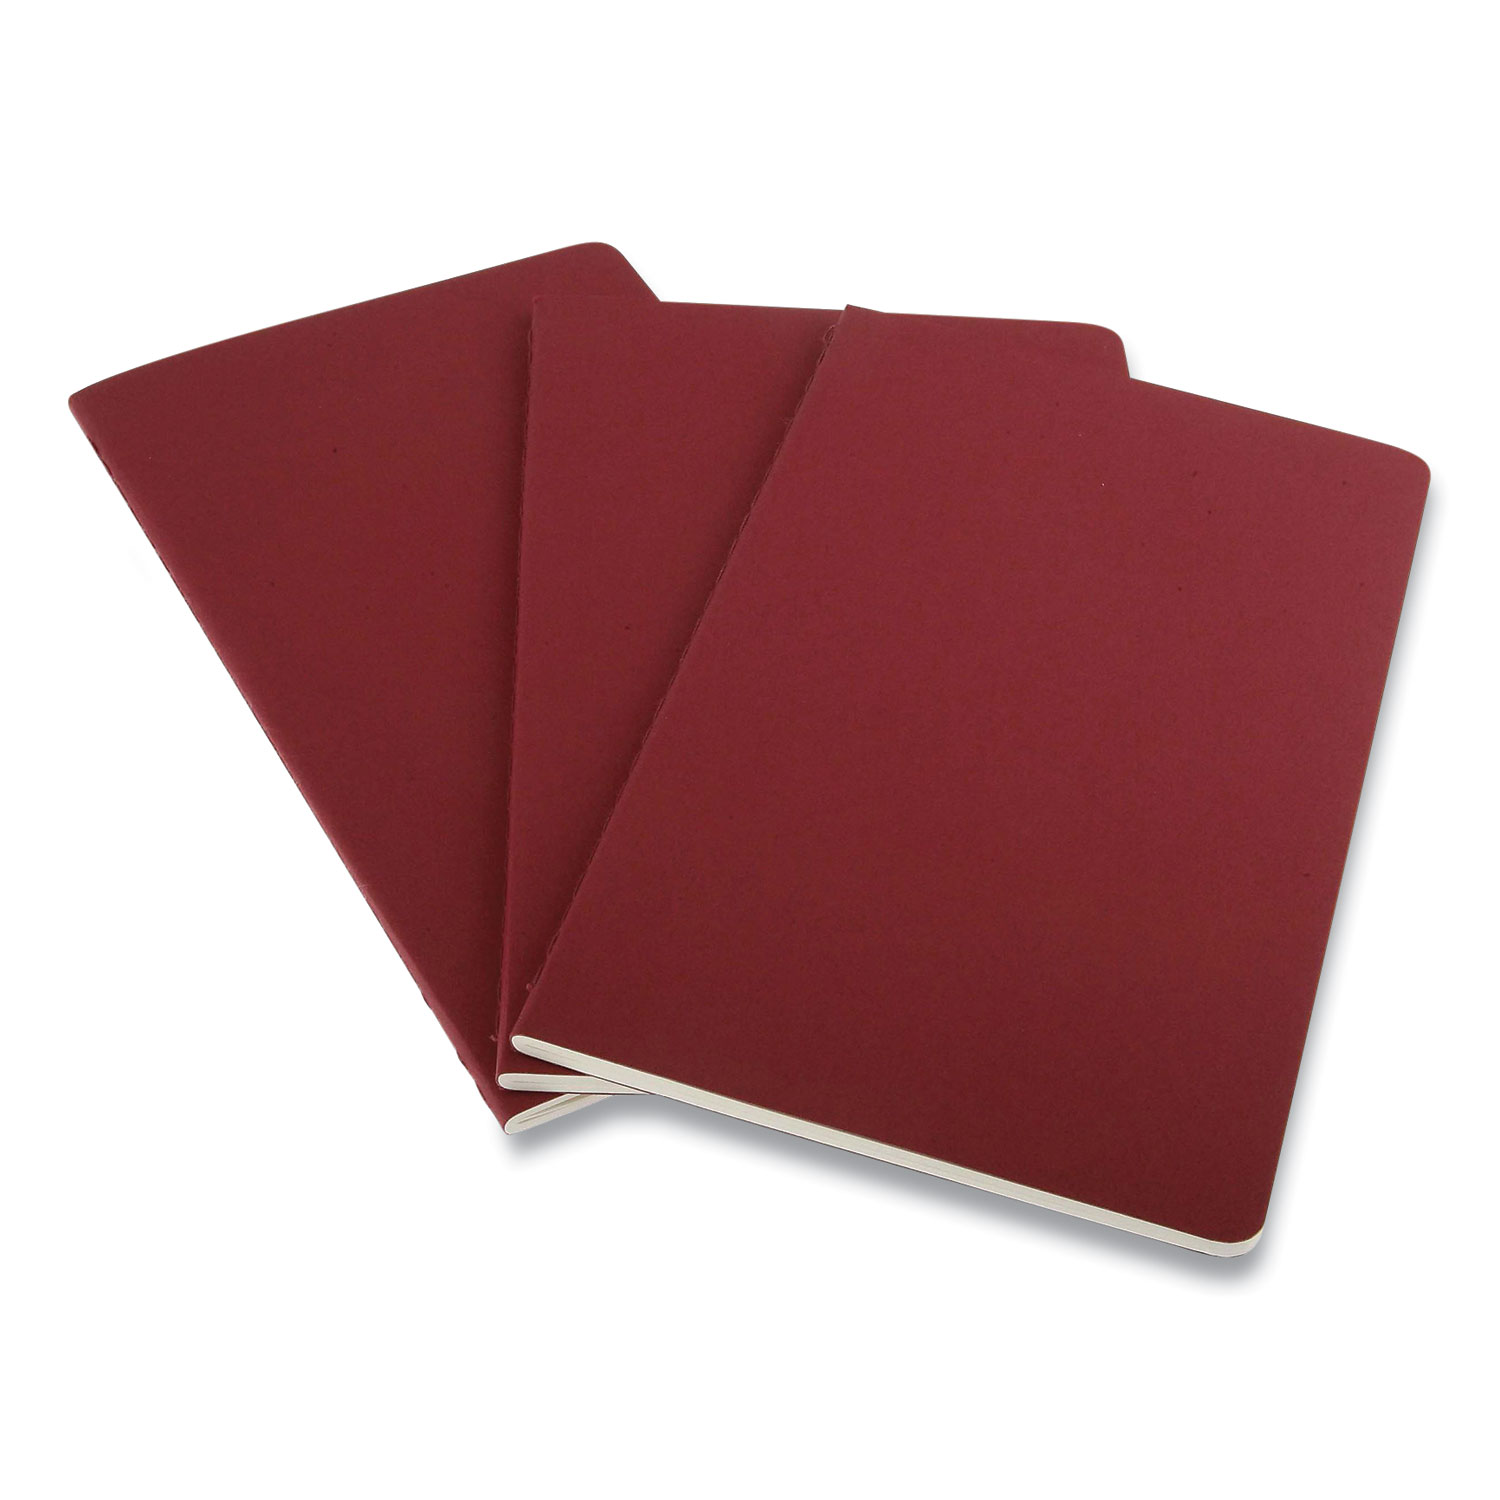 Moleskine® Cahier Journal, Quadrille Rule, Cranberry Red Cover, 5 x 8.25, 80 Sheets, 3/Pack